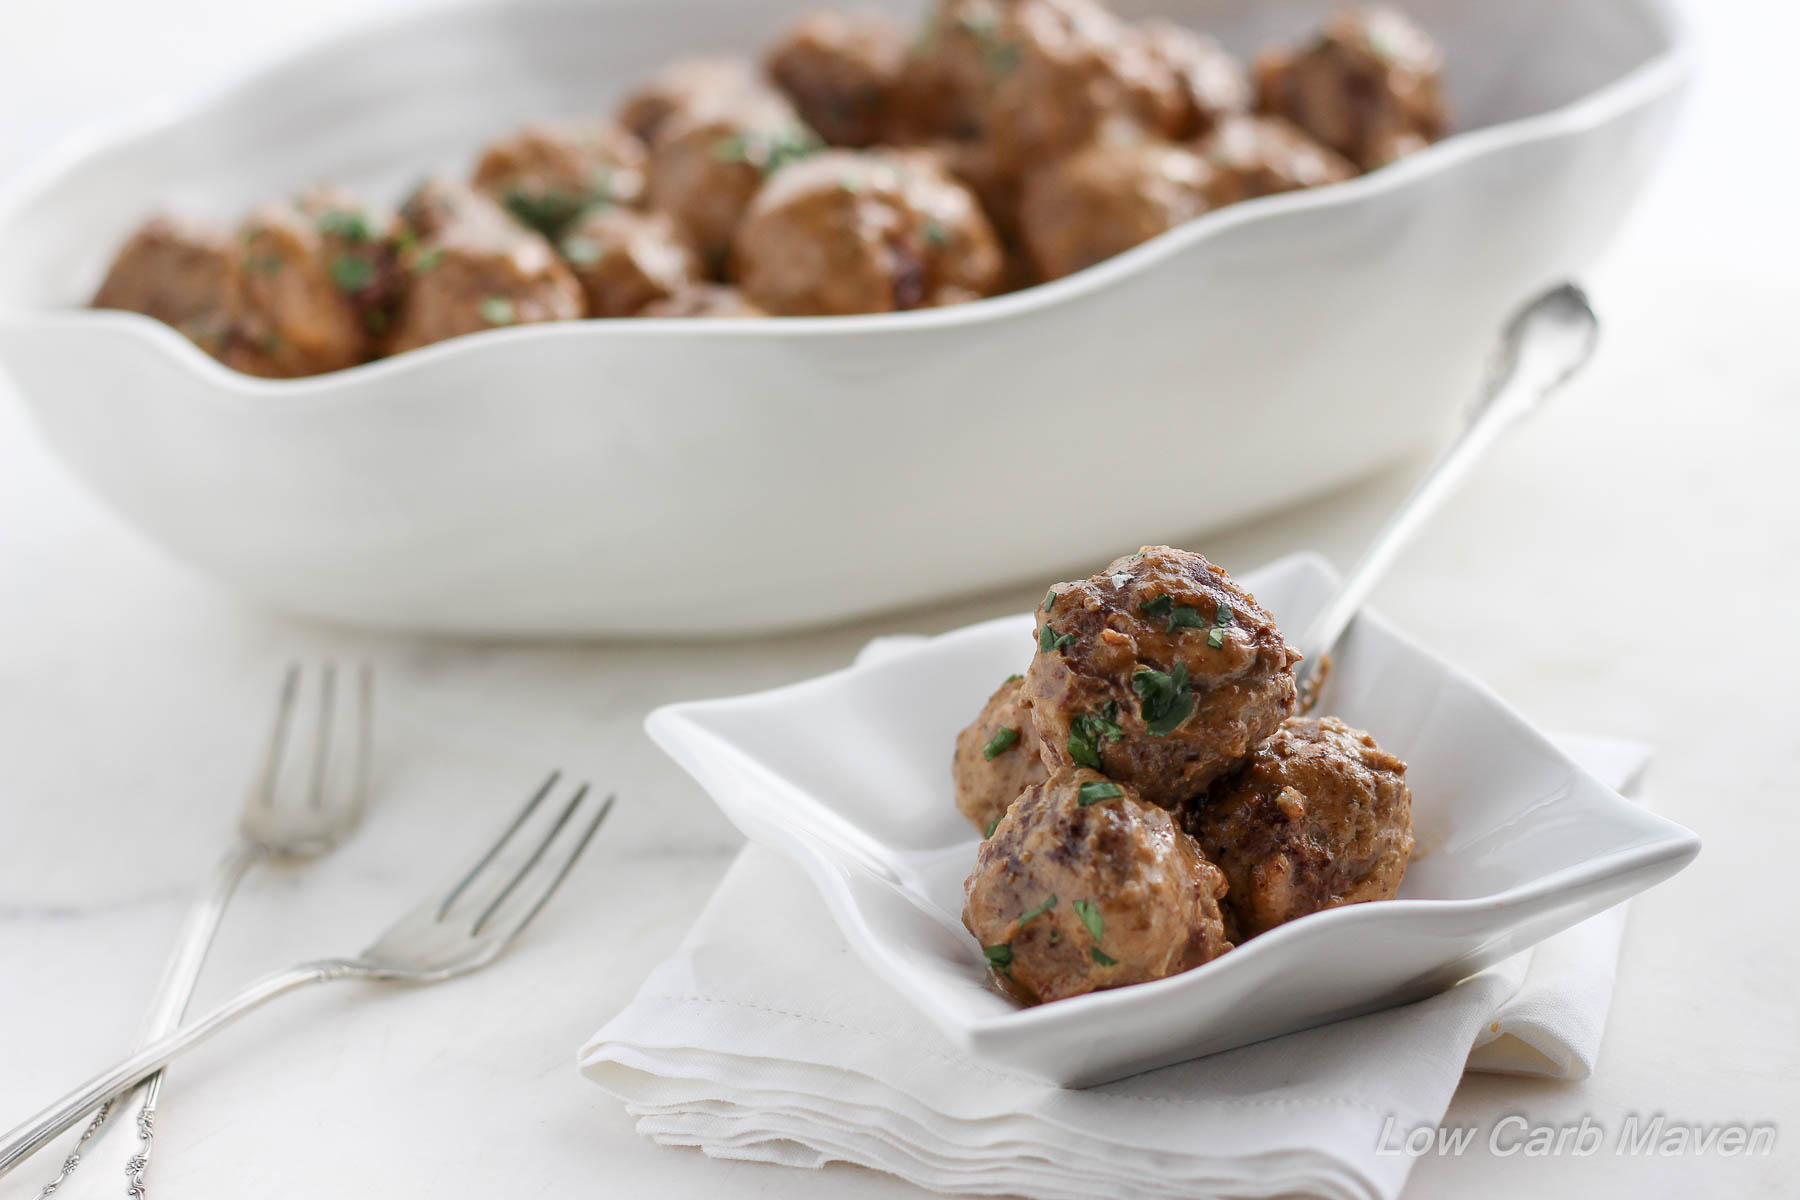 Low Carb Swedish Meatballs - great as an appetizer or a meal served over zoodles! | lowcarb, gluten-free, keto, thm | LowCarbMaven.com